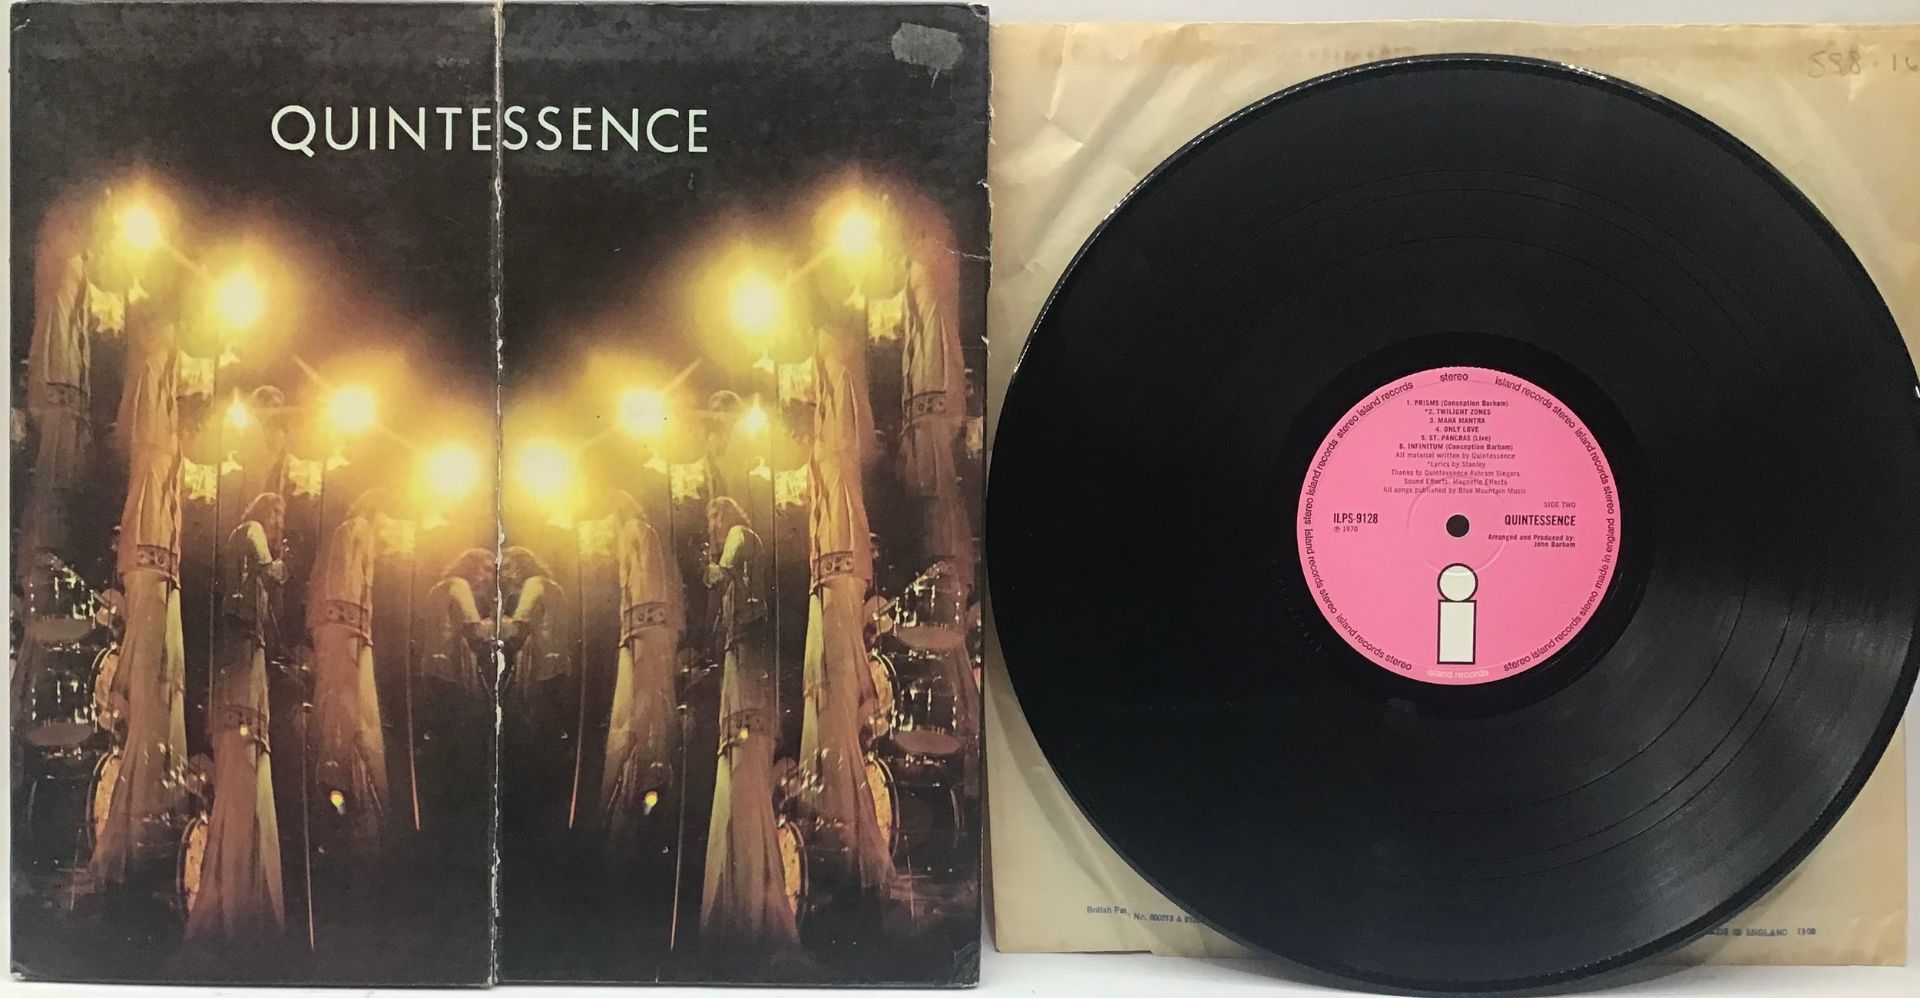 QUINTESSENCE SELF TITLED VINYL LP RECORD. A superb 1st press copy found here on Pink Island ILPS